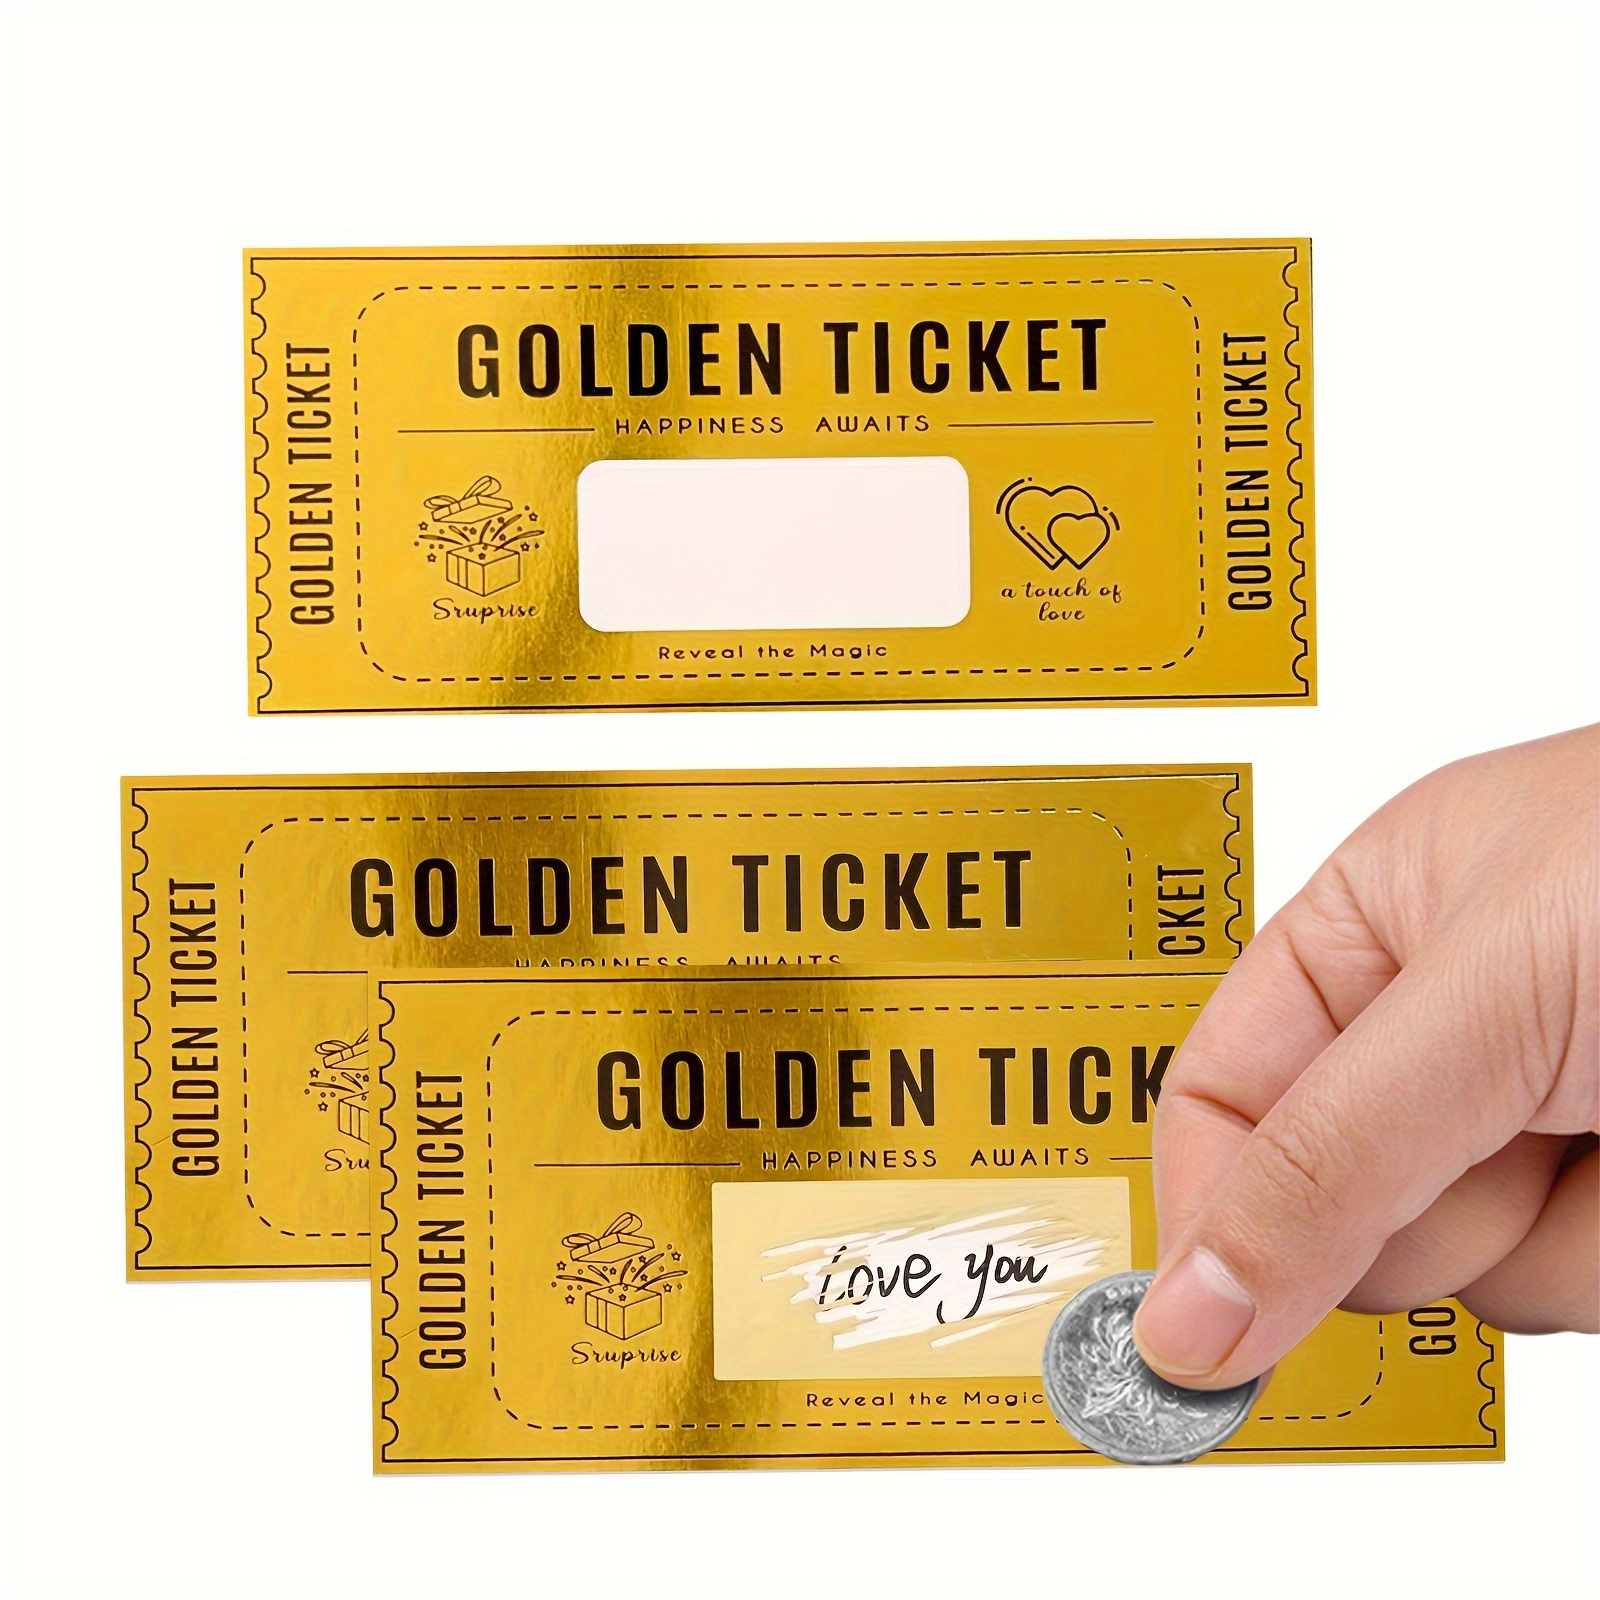 

Golden Scratch-off Ticket With Envelope And Sticker - 1 Pack Surprise Gift Card For Birthday, Romantic Love, Wedding Anniversary - Reveal Your Wish, Ideal For Son, Daughter, Couples, Him Or Her